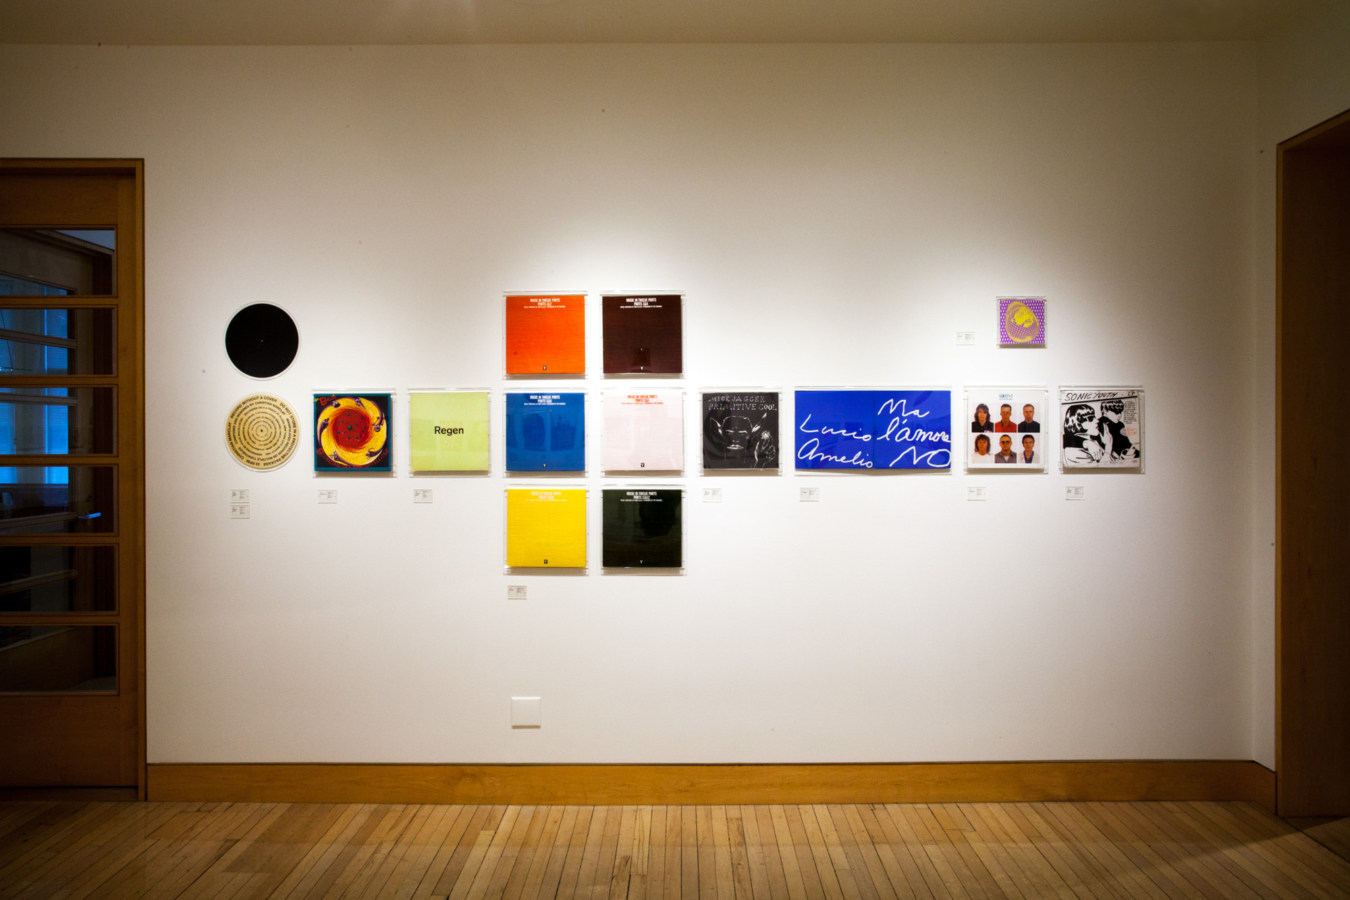 Color image of vinyl records and record sleeves on white gallery walls